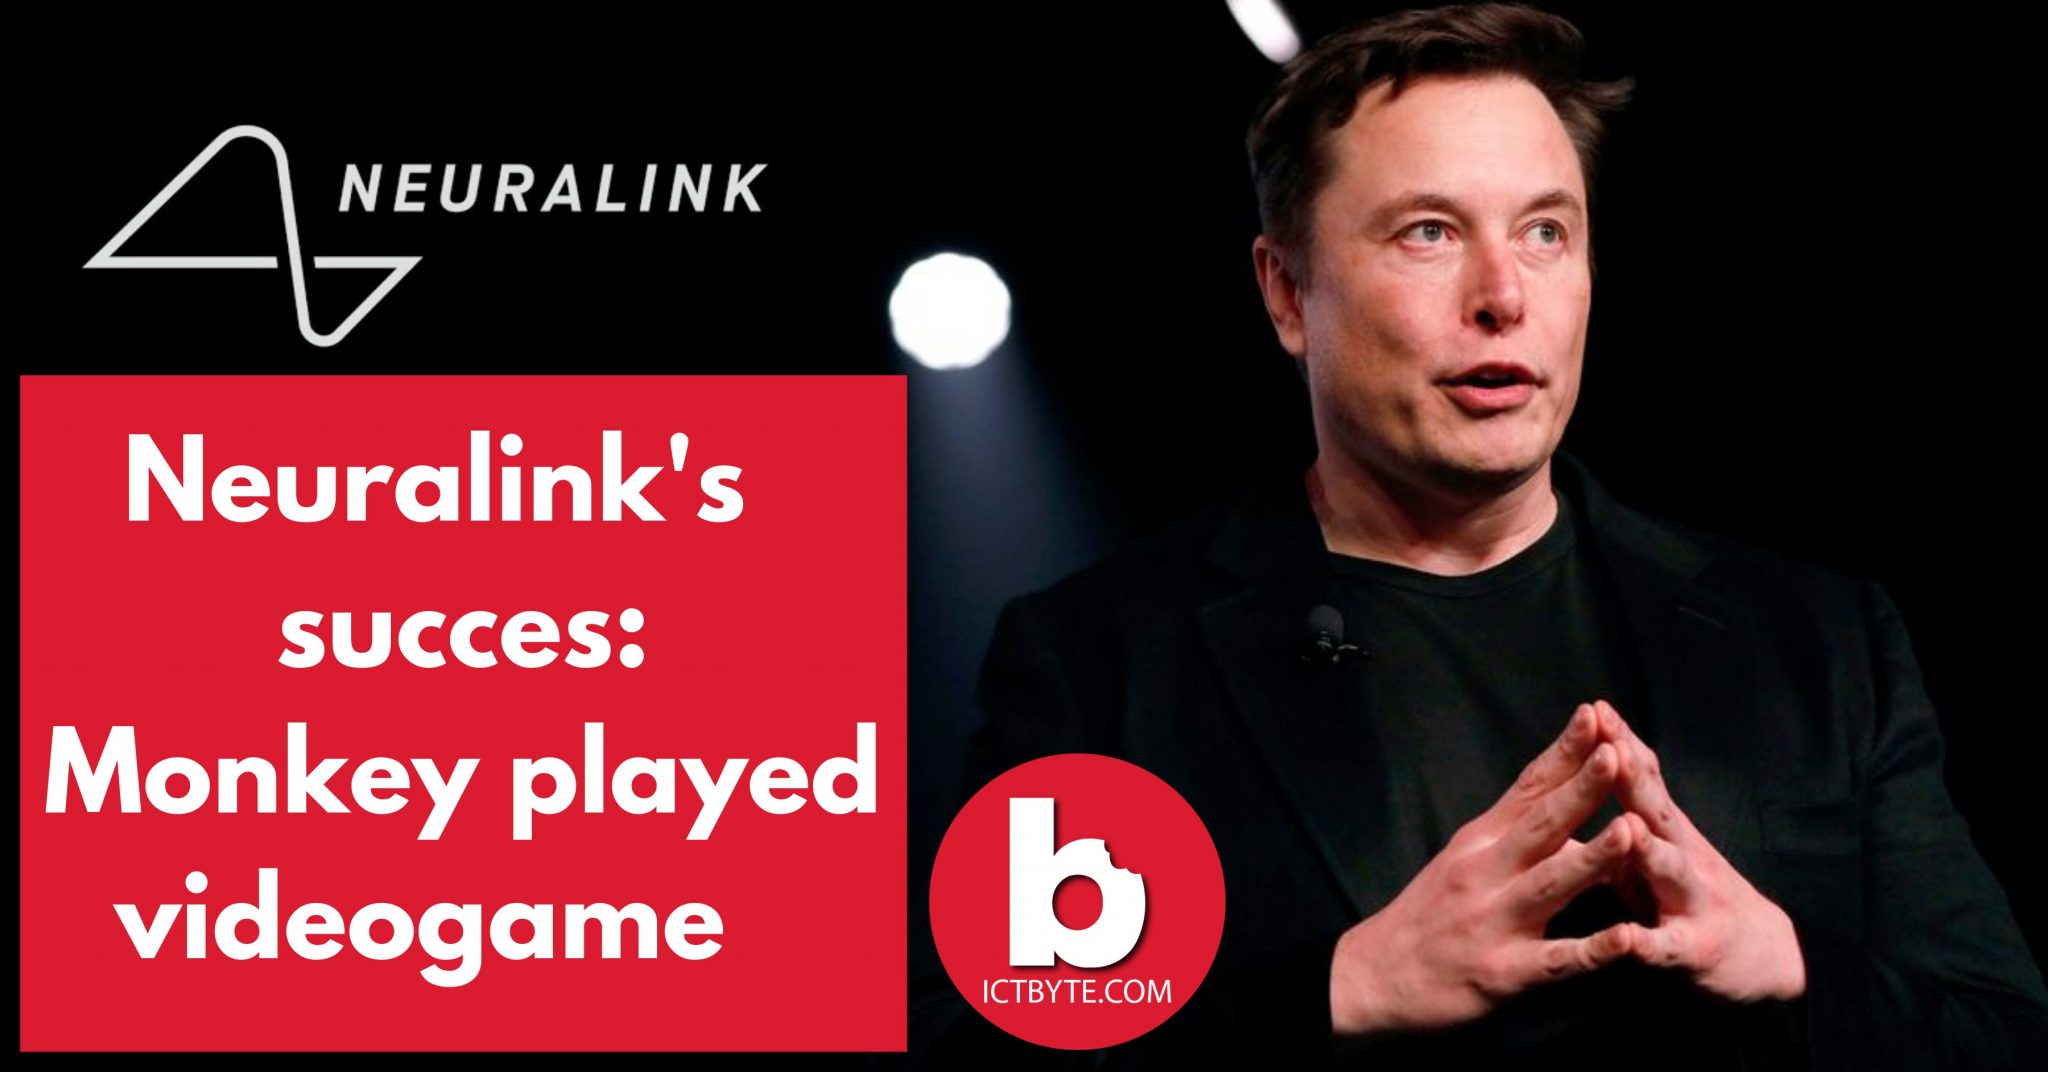 Elon Musk's Neuralink shows monkey playing video game – ICT BYTE